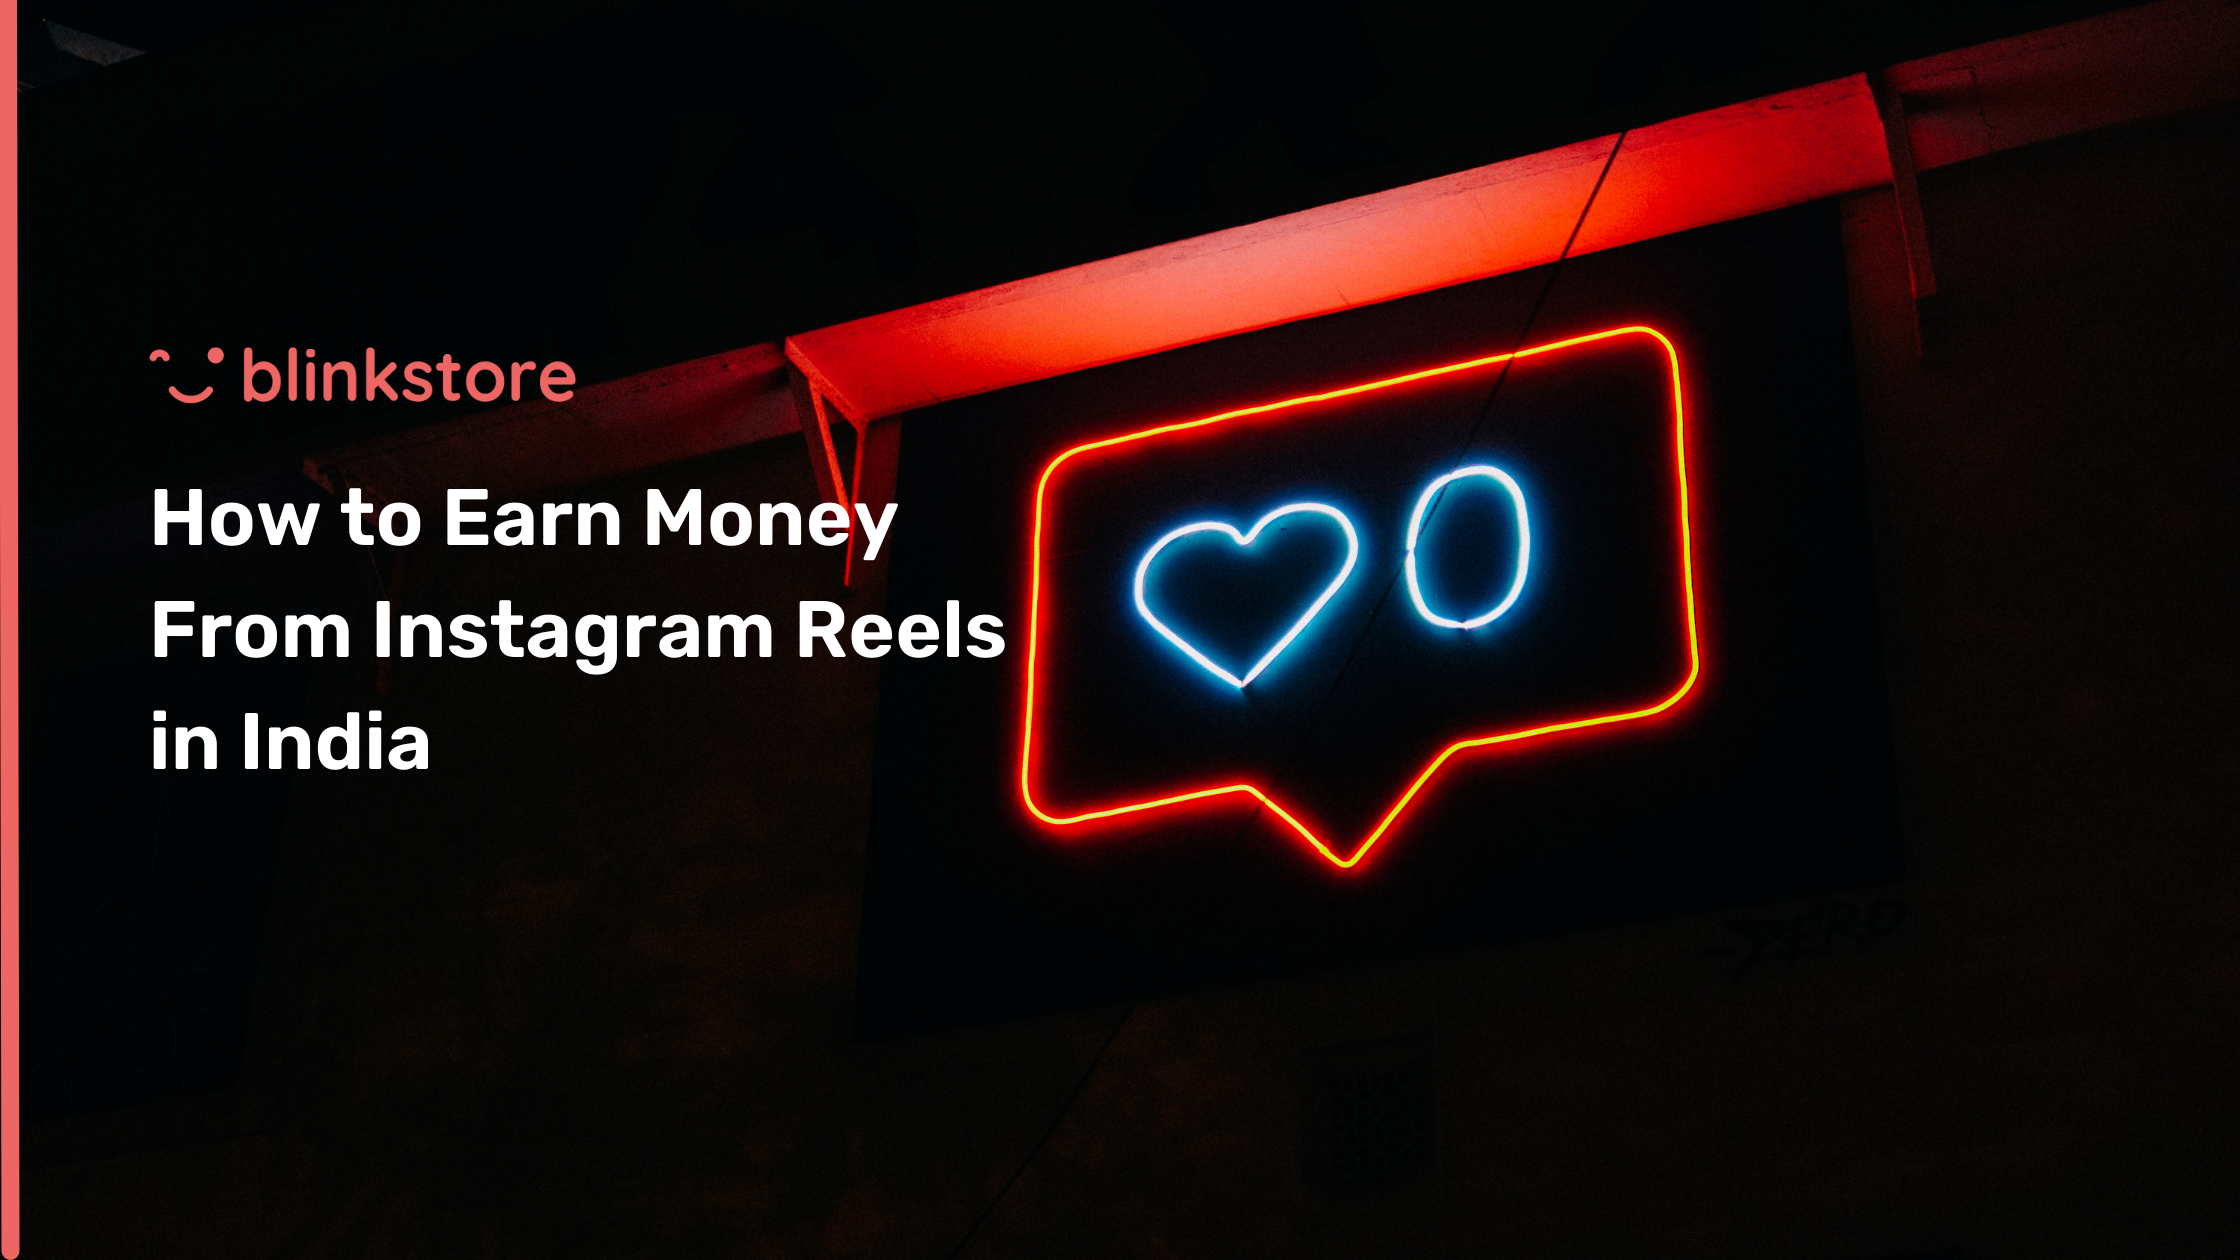 How to earn money from Instagram reels in India